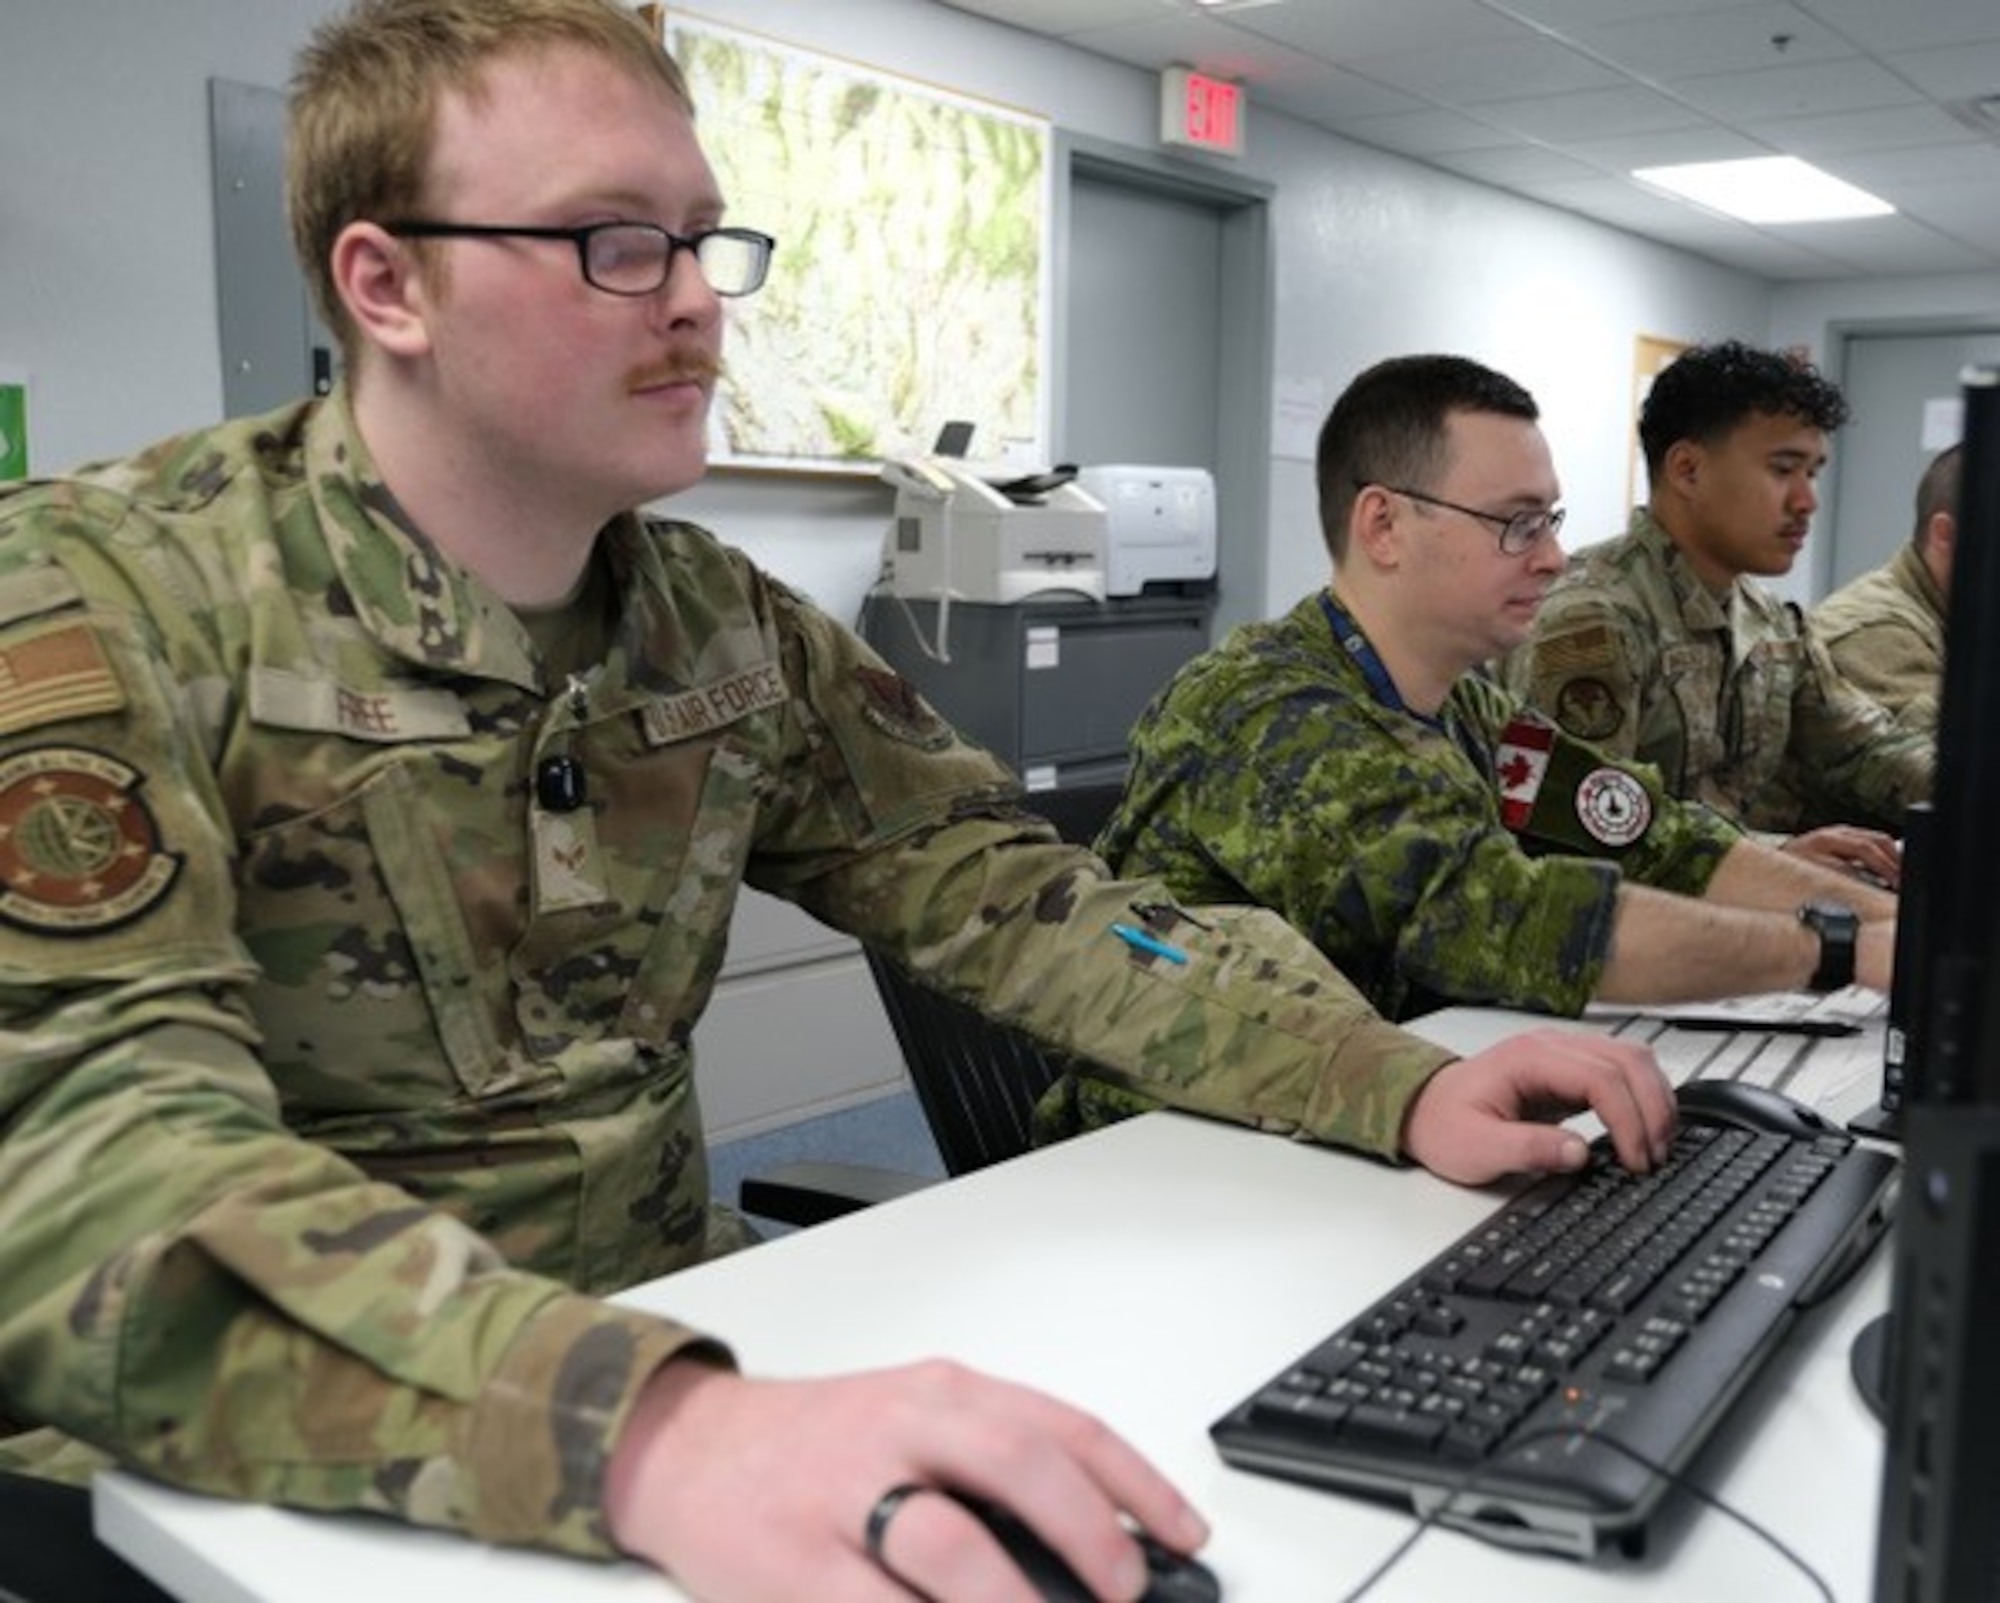 United States Airmen and a Royal Canadian Air Force member participate in the  Transformational Modeling for Battle Management experiment, using an artificial intelligence-enabled technology, known as “Match Effectors” at Nellis Air Force Base, Nevada, Dec. 4, 2023.   The 805th Combat Training Squadron, also known as the Shadow Operations Center – Nellis, executed their annual Capstone event by experimenting with and developing tactics, techniques, and procedures for integrated two-way kill-chain automation between the operational and tactical command and control including battle management levels, to create competitive advantages for the United States and its allies and partners.  (The image has been altered by removing badges for security purposes and cropped to focus on the subject.) (U.S. Air Force photo by Keith Keel)